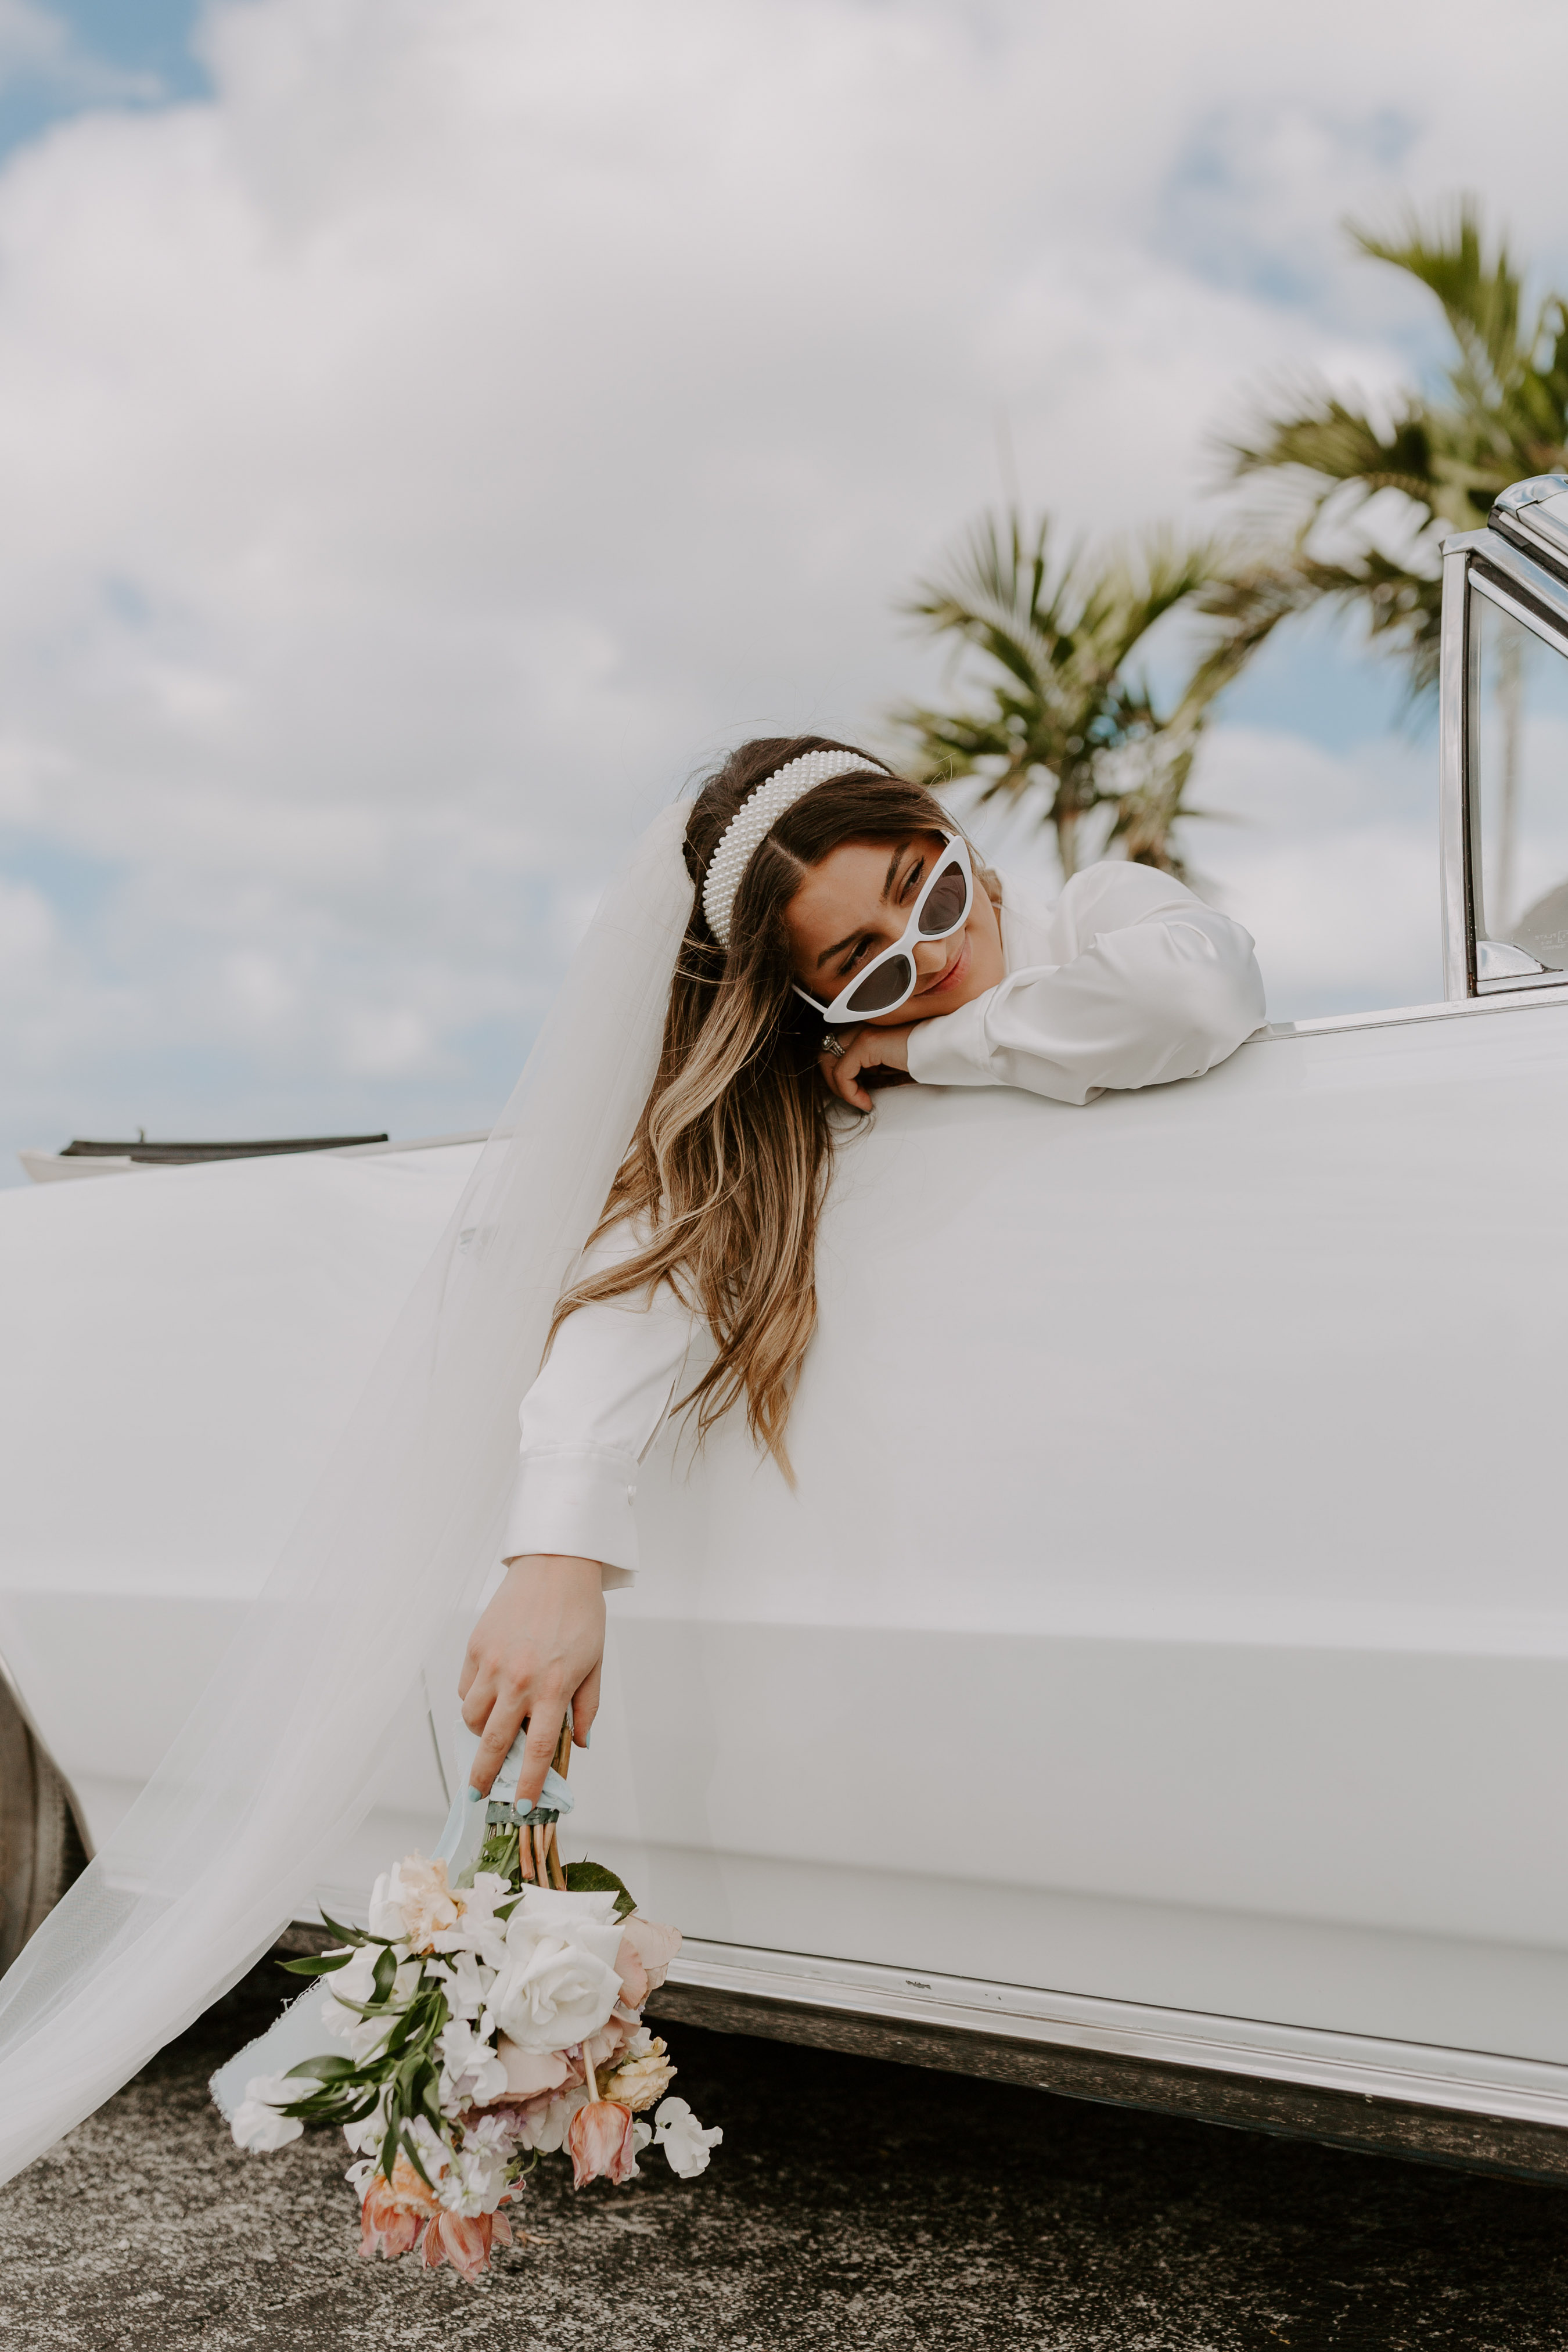 Bride with bouquet in vintage white car